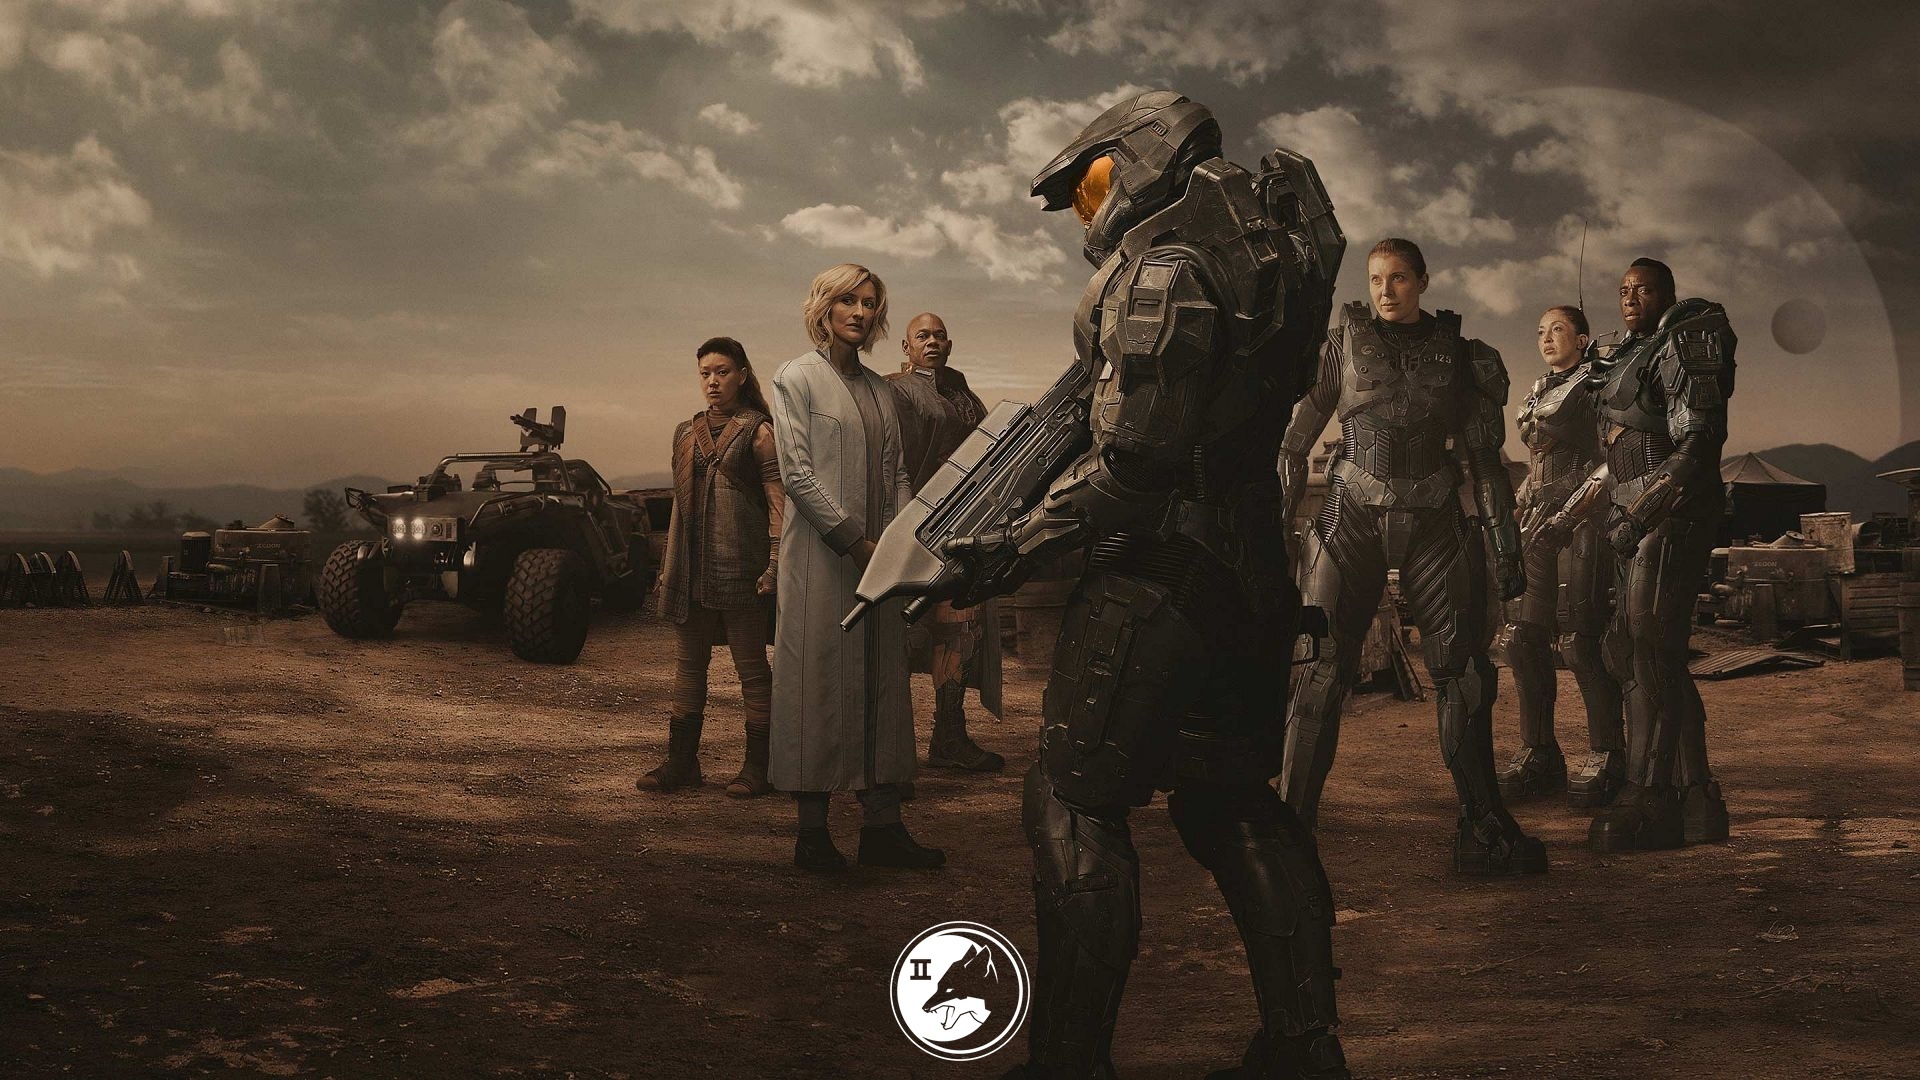 Halo (TV Series): Action-adventure, based on the video game series. 1920x1080 Full HD Wallpaper.